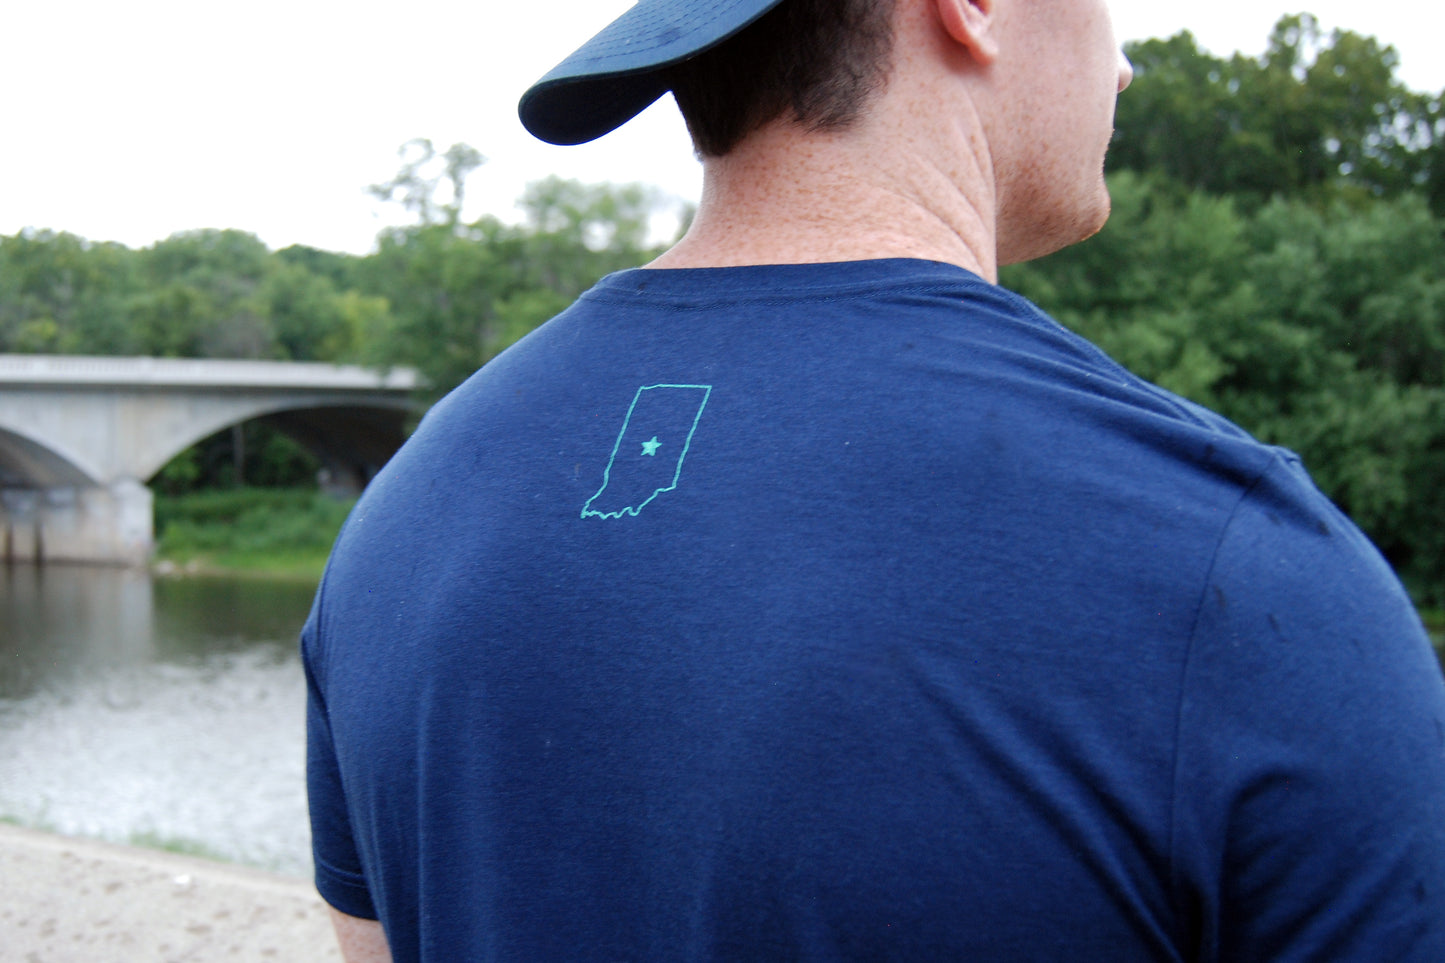 LOGO TEE - TRUE NAVY - Indy Over Everything